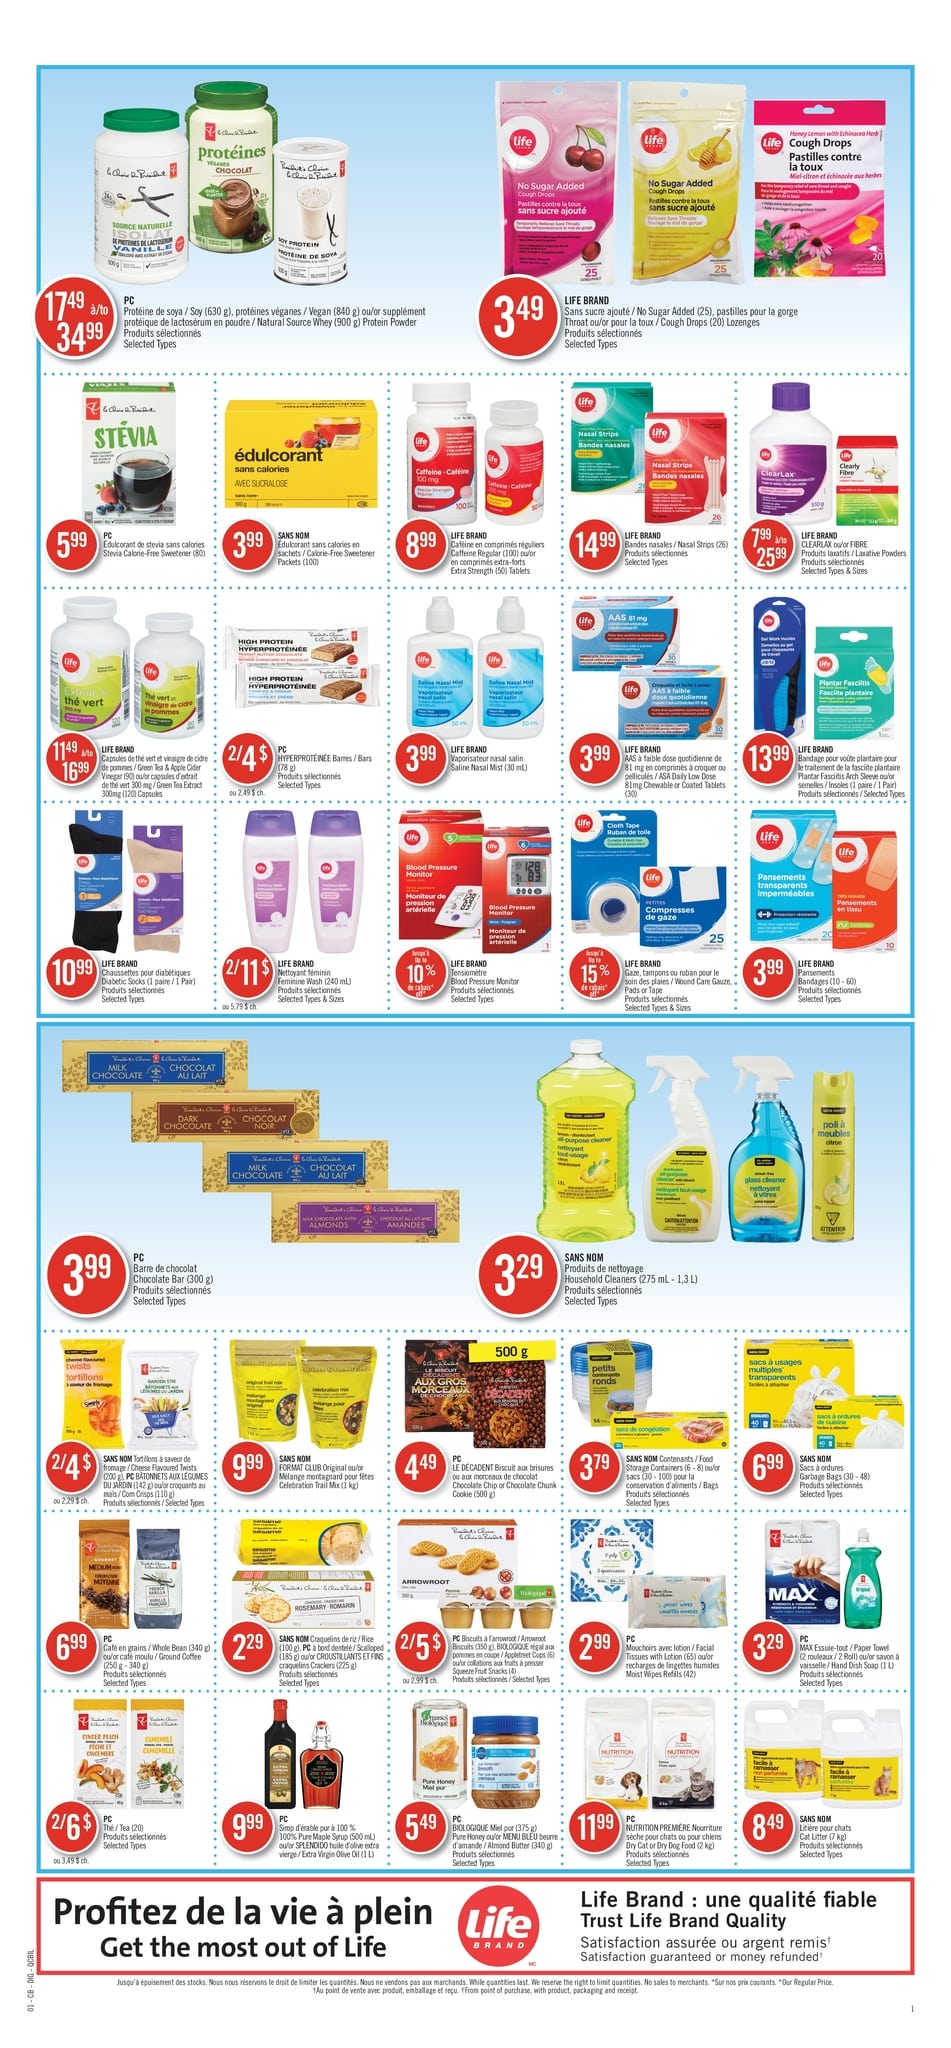 Pharmaprix - Weekly Flyer Specials - Page 12